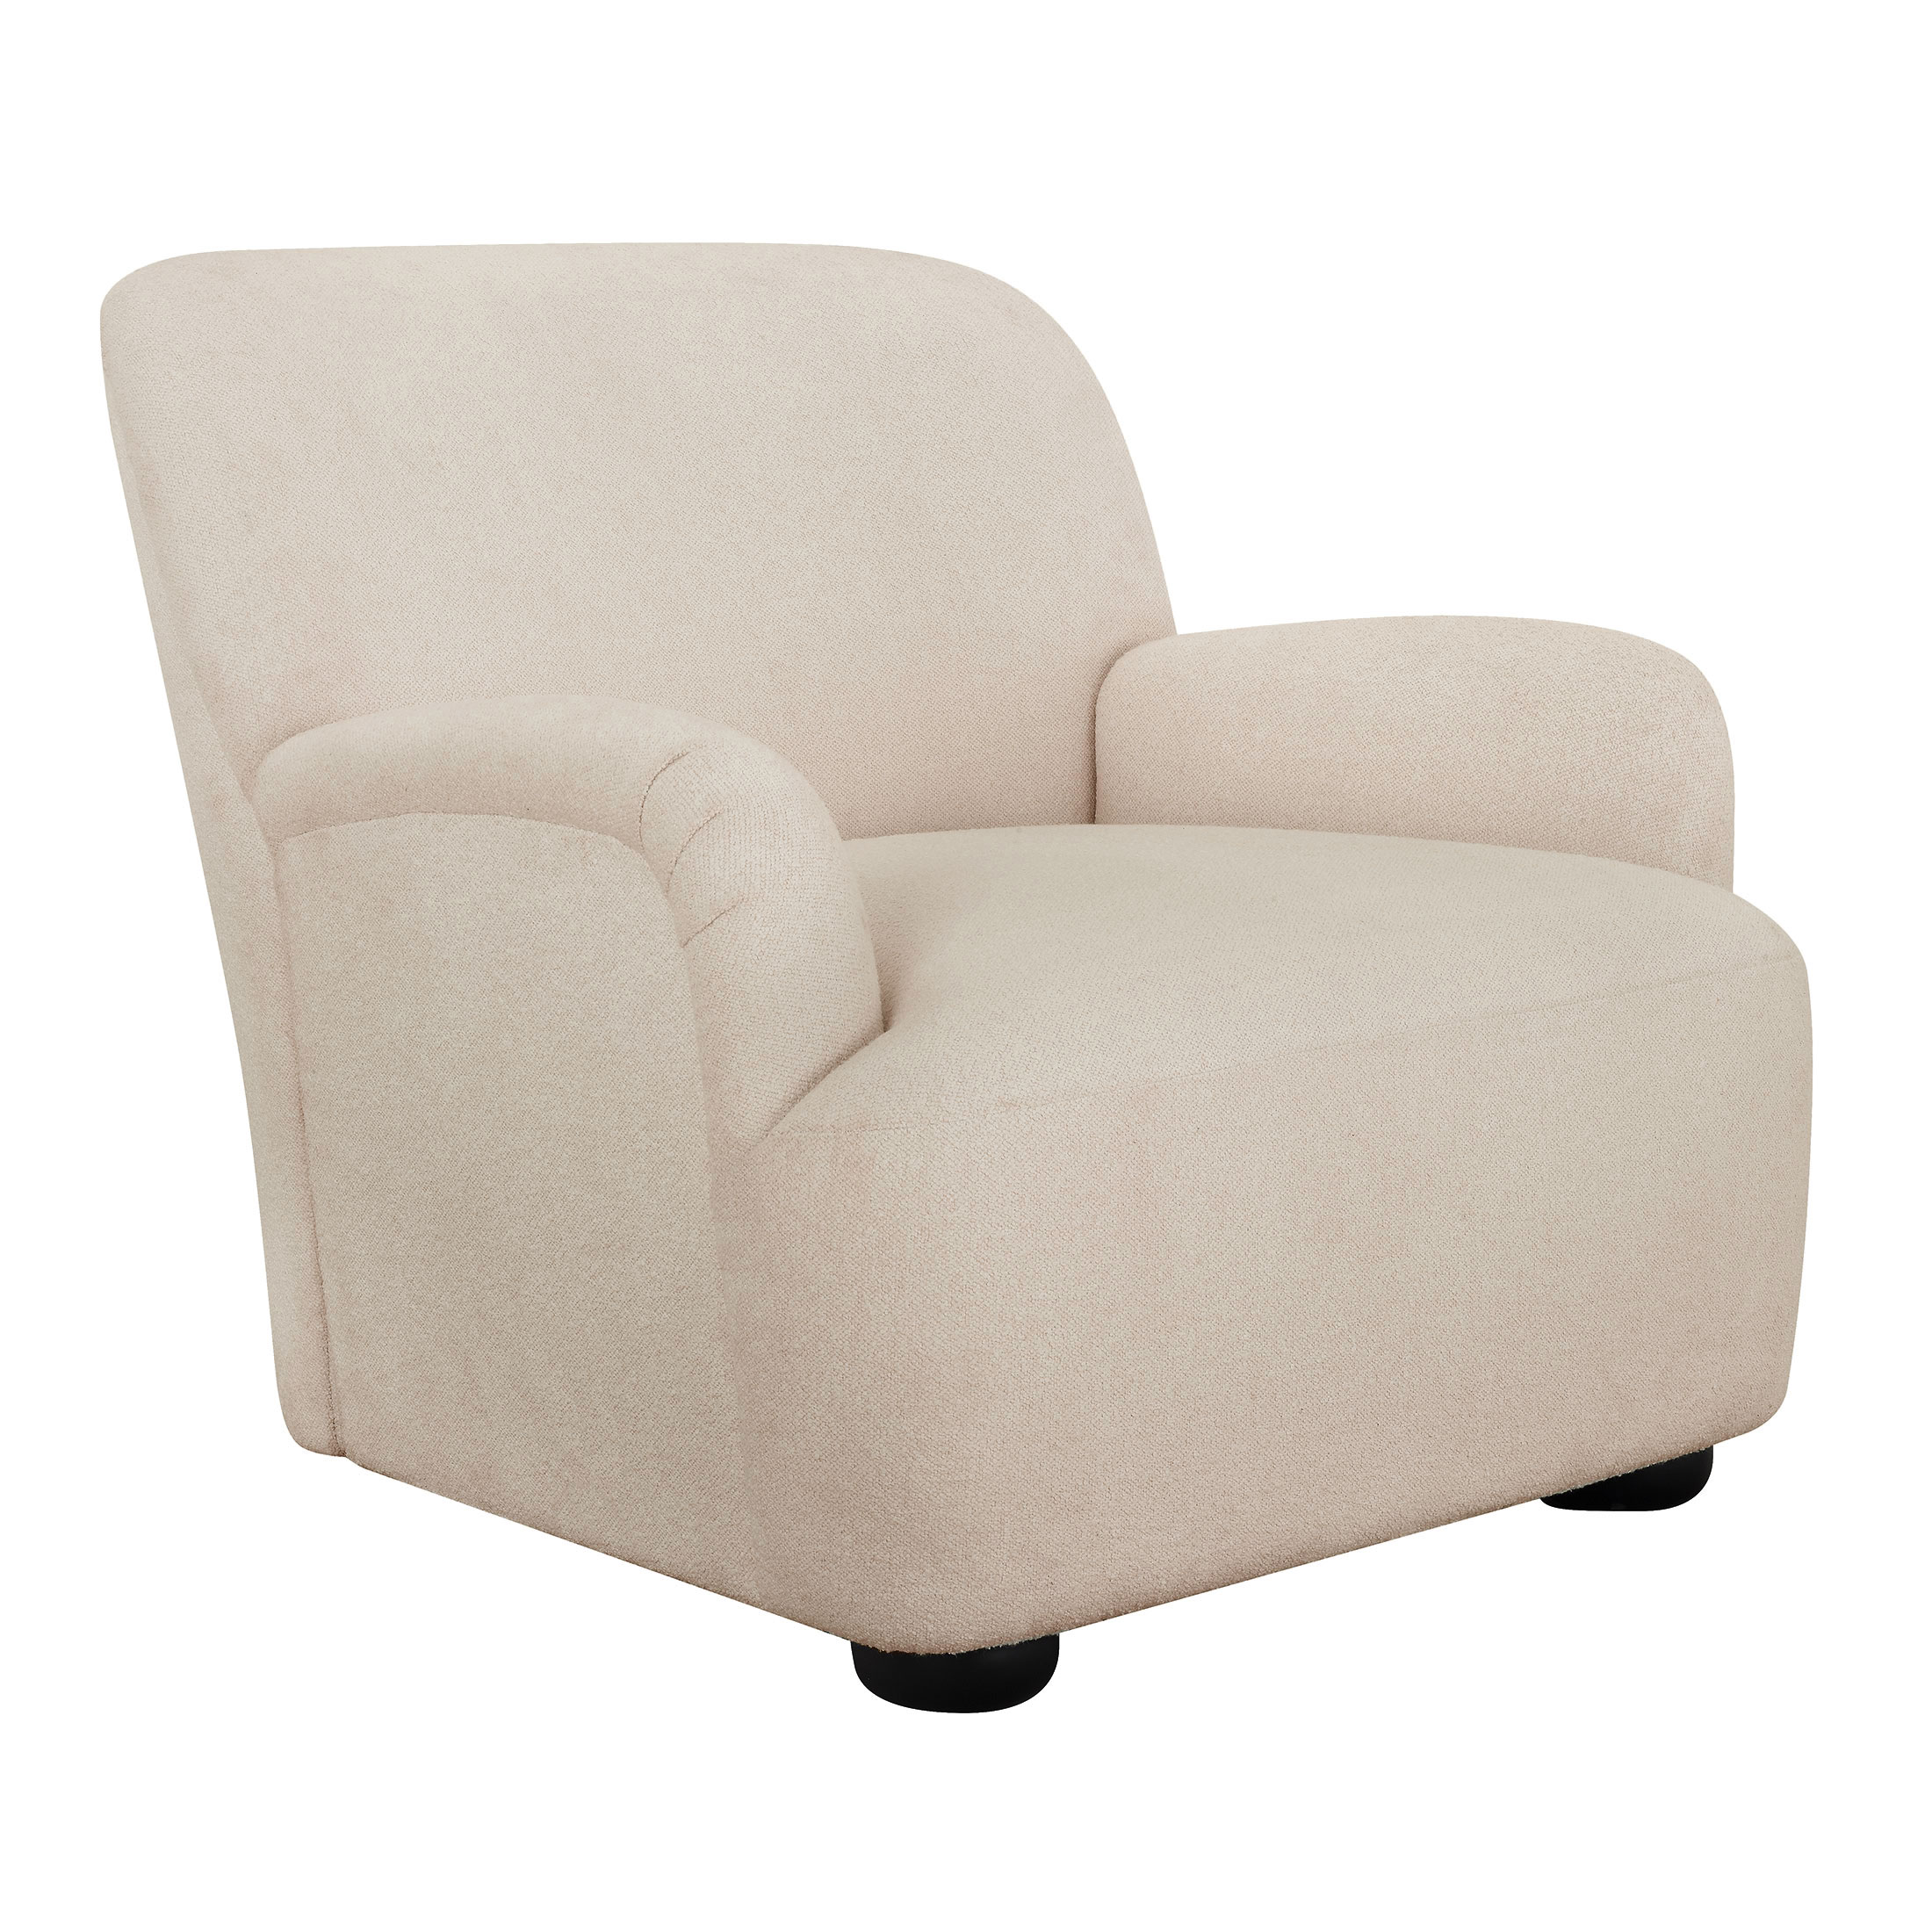 Better Homes & Gardens Waylen Accent Chair, by Dave & Jenny Marrs - image 2 of 8